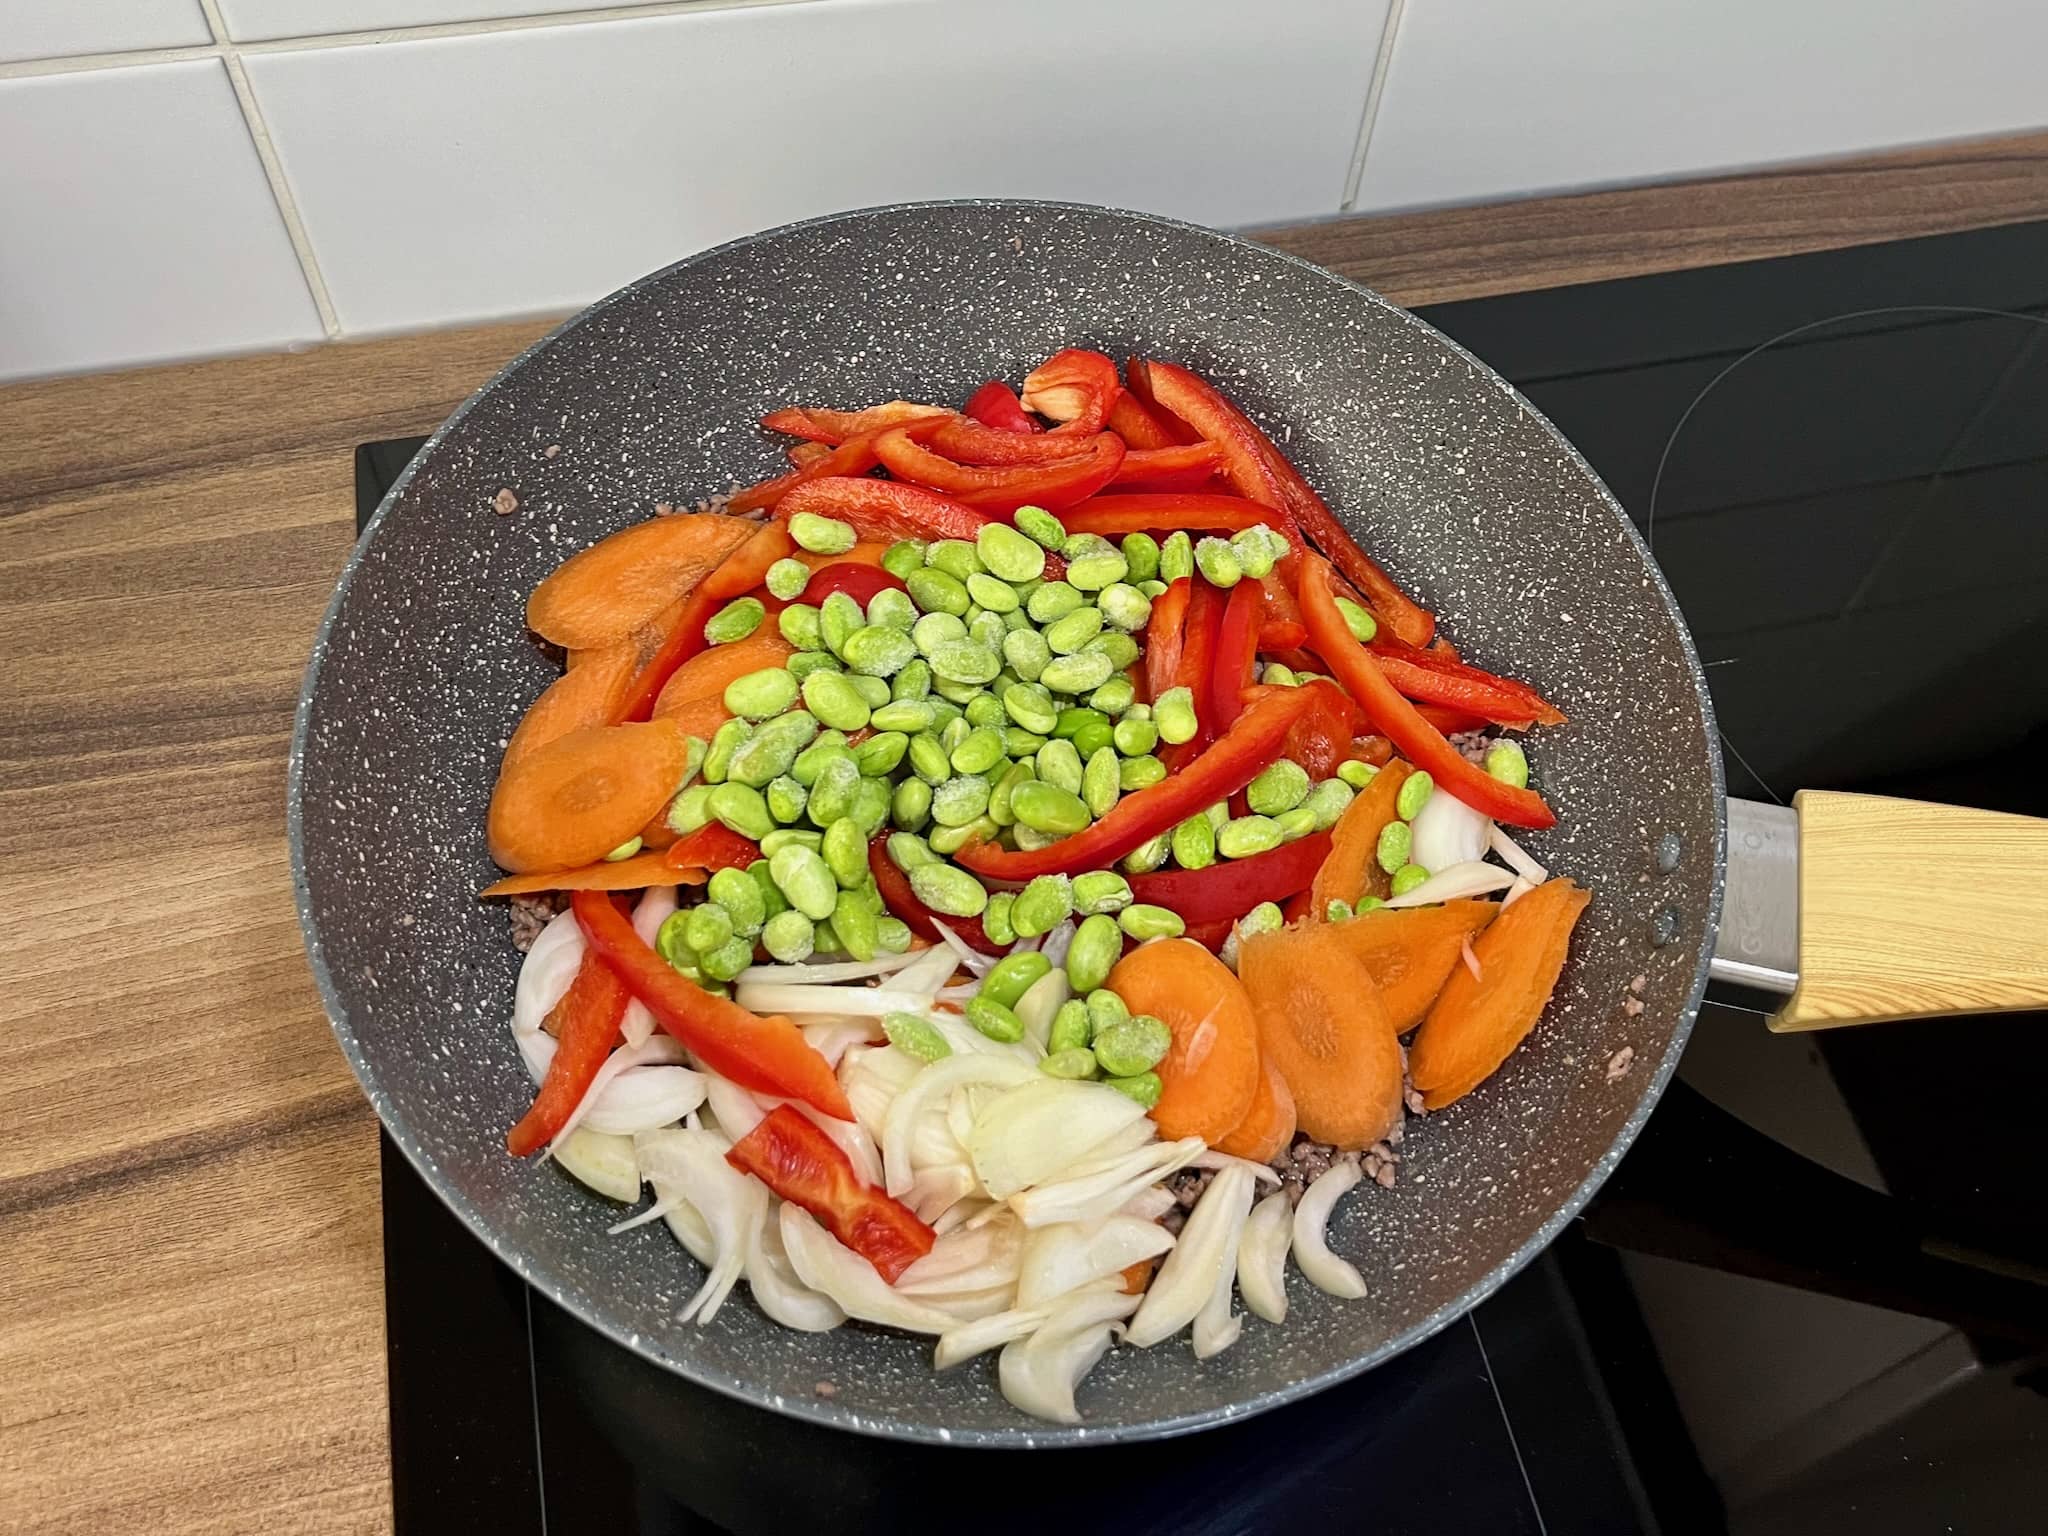 Vegetables and soybeans are added to the beef in the pan